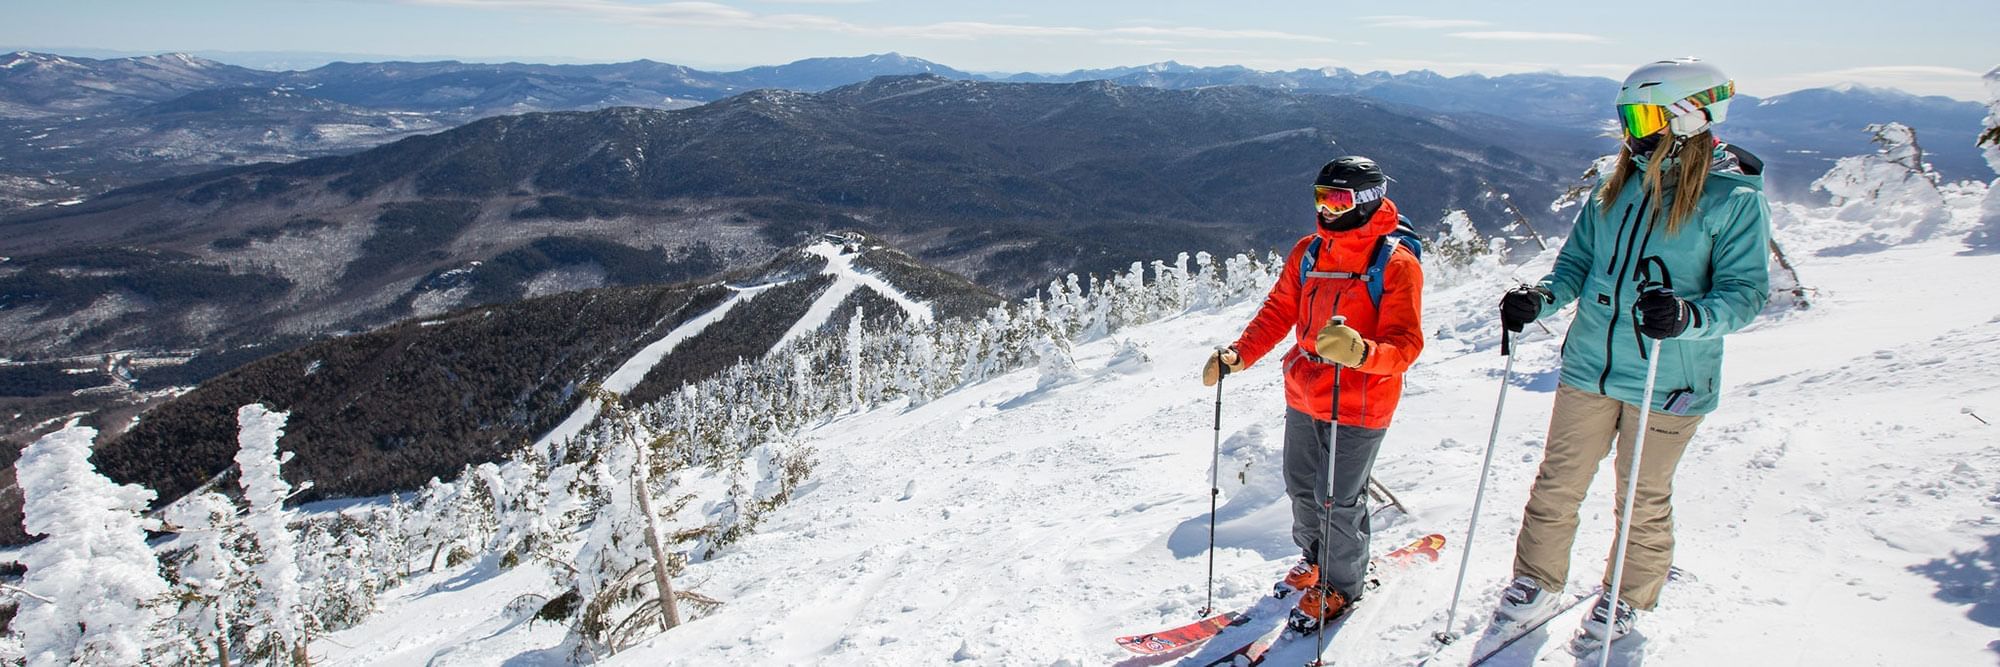 Man and woman on skis overlooking Whiteface Mountain.